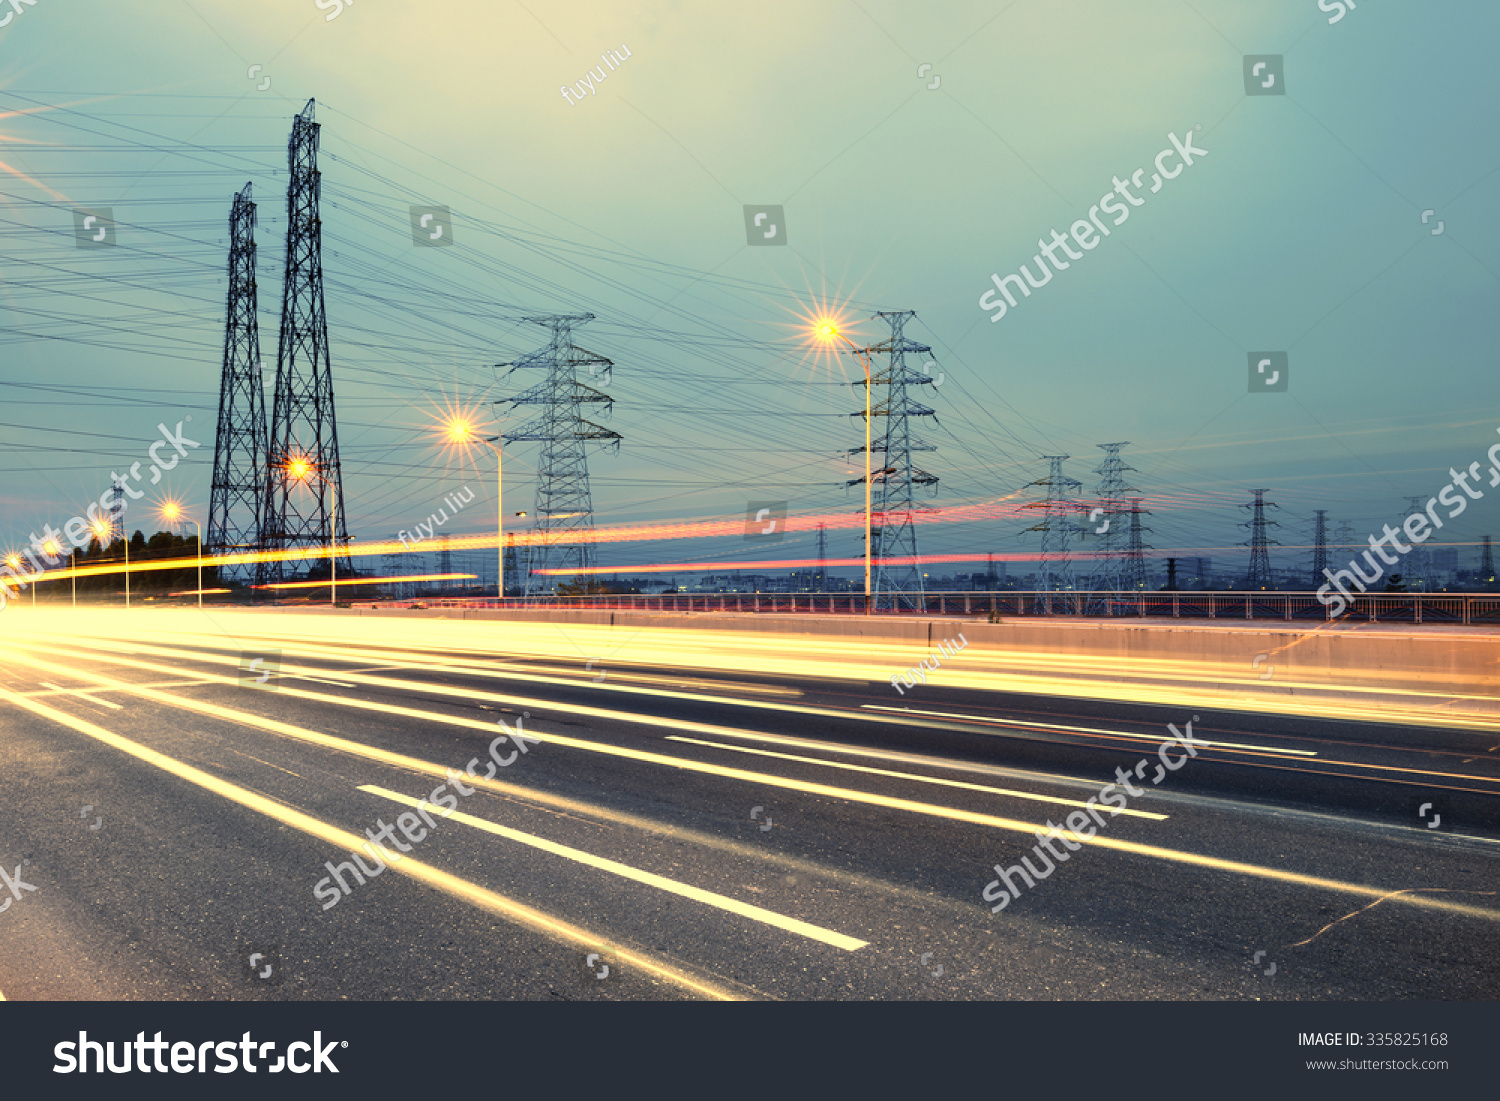 high voltage post.High-voltage tower sky background,besides the highway #335825168